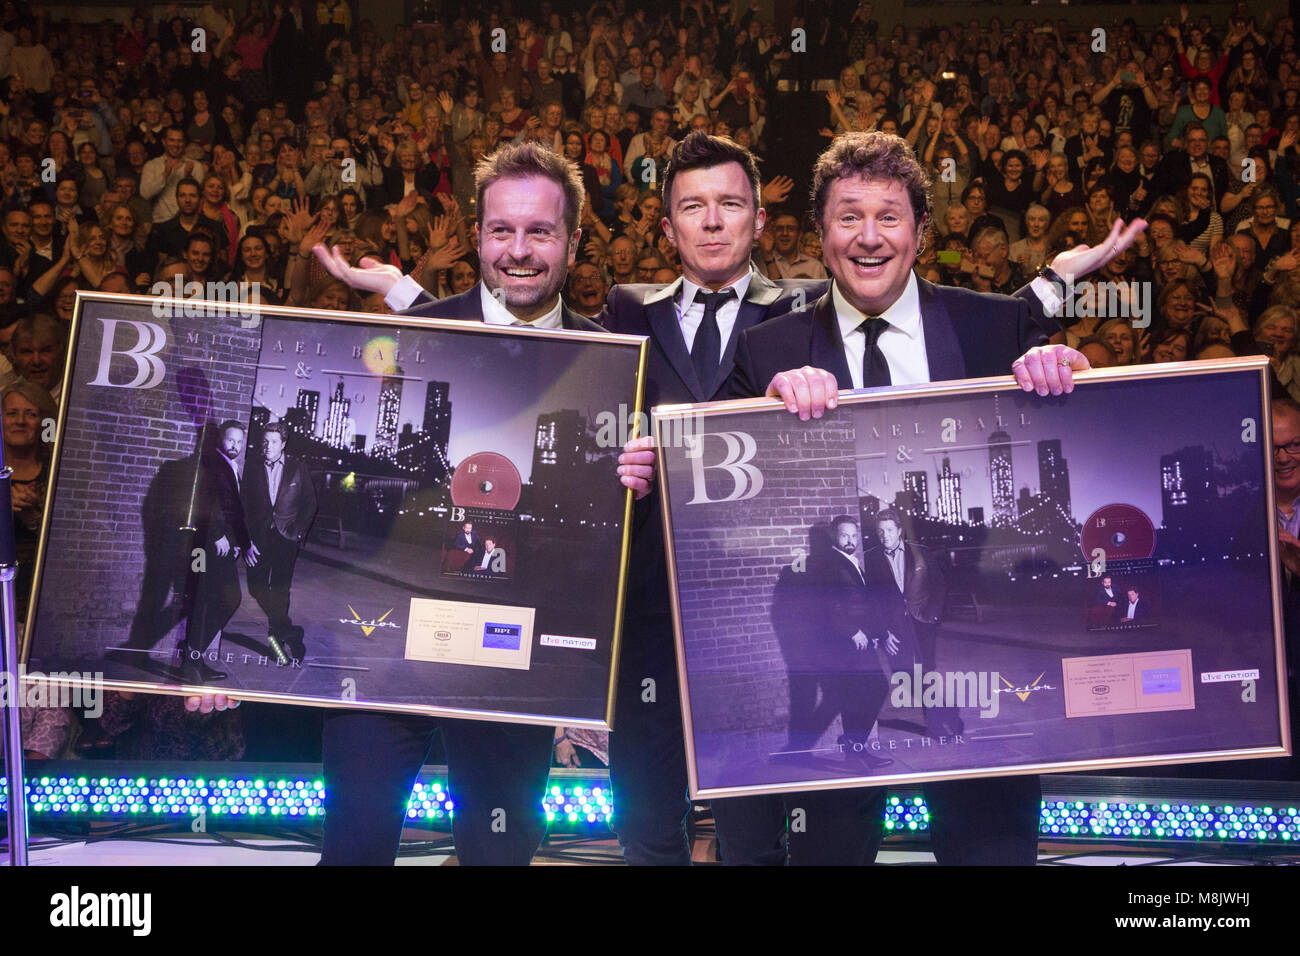 L-R: Alfie Boe, Rick Astley, Michael Ball. Rick Astley presents Michael Ball and Alfie Boe with a golden disc live on stage during their performance at the Eventim Apollo, Hammersmith. Michael Ball and Alfie Boe's album ‘Together’ went gold in just 15 days. Stock Photo